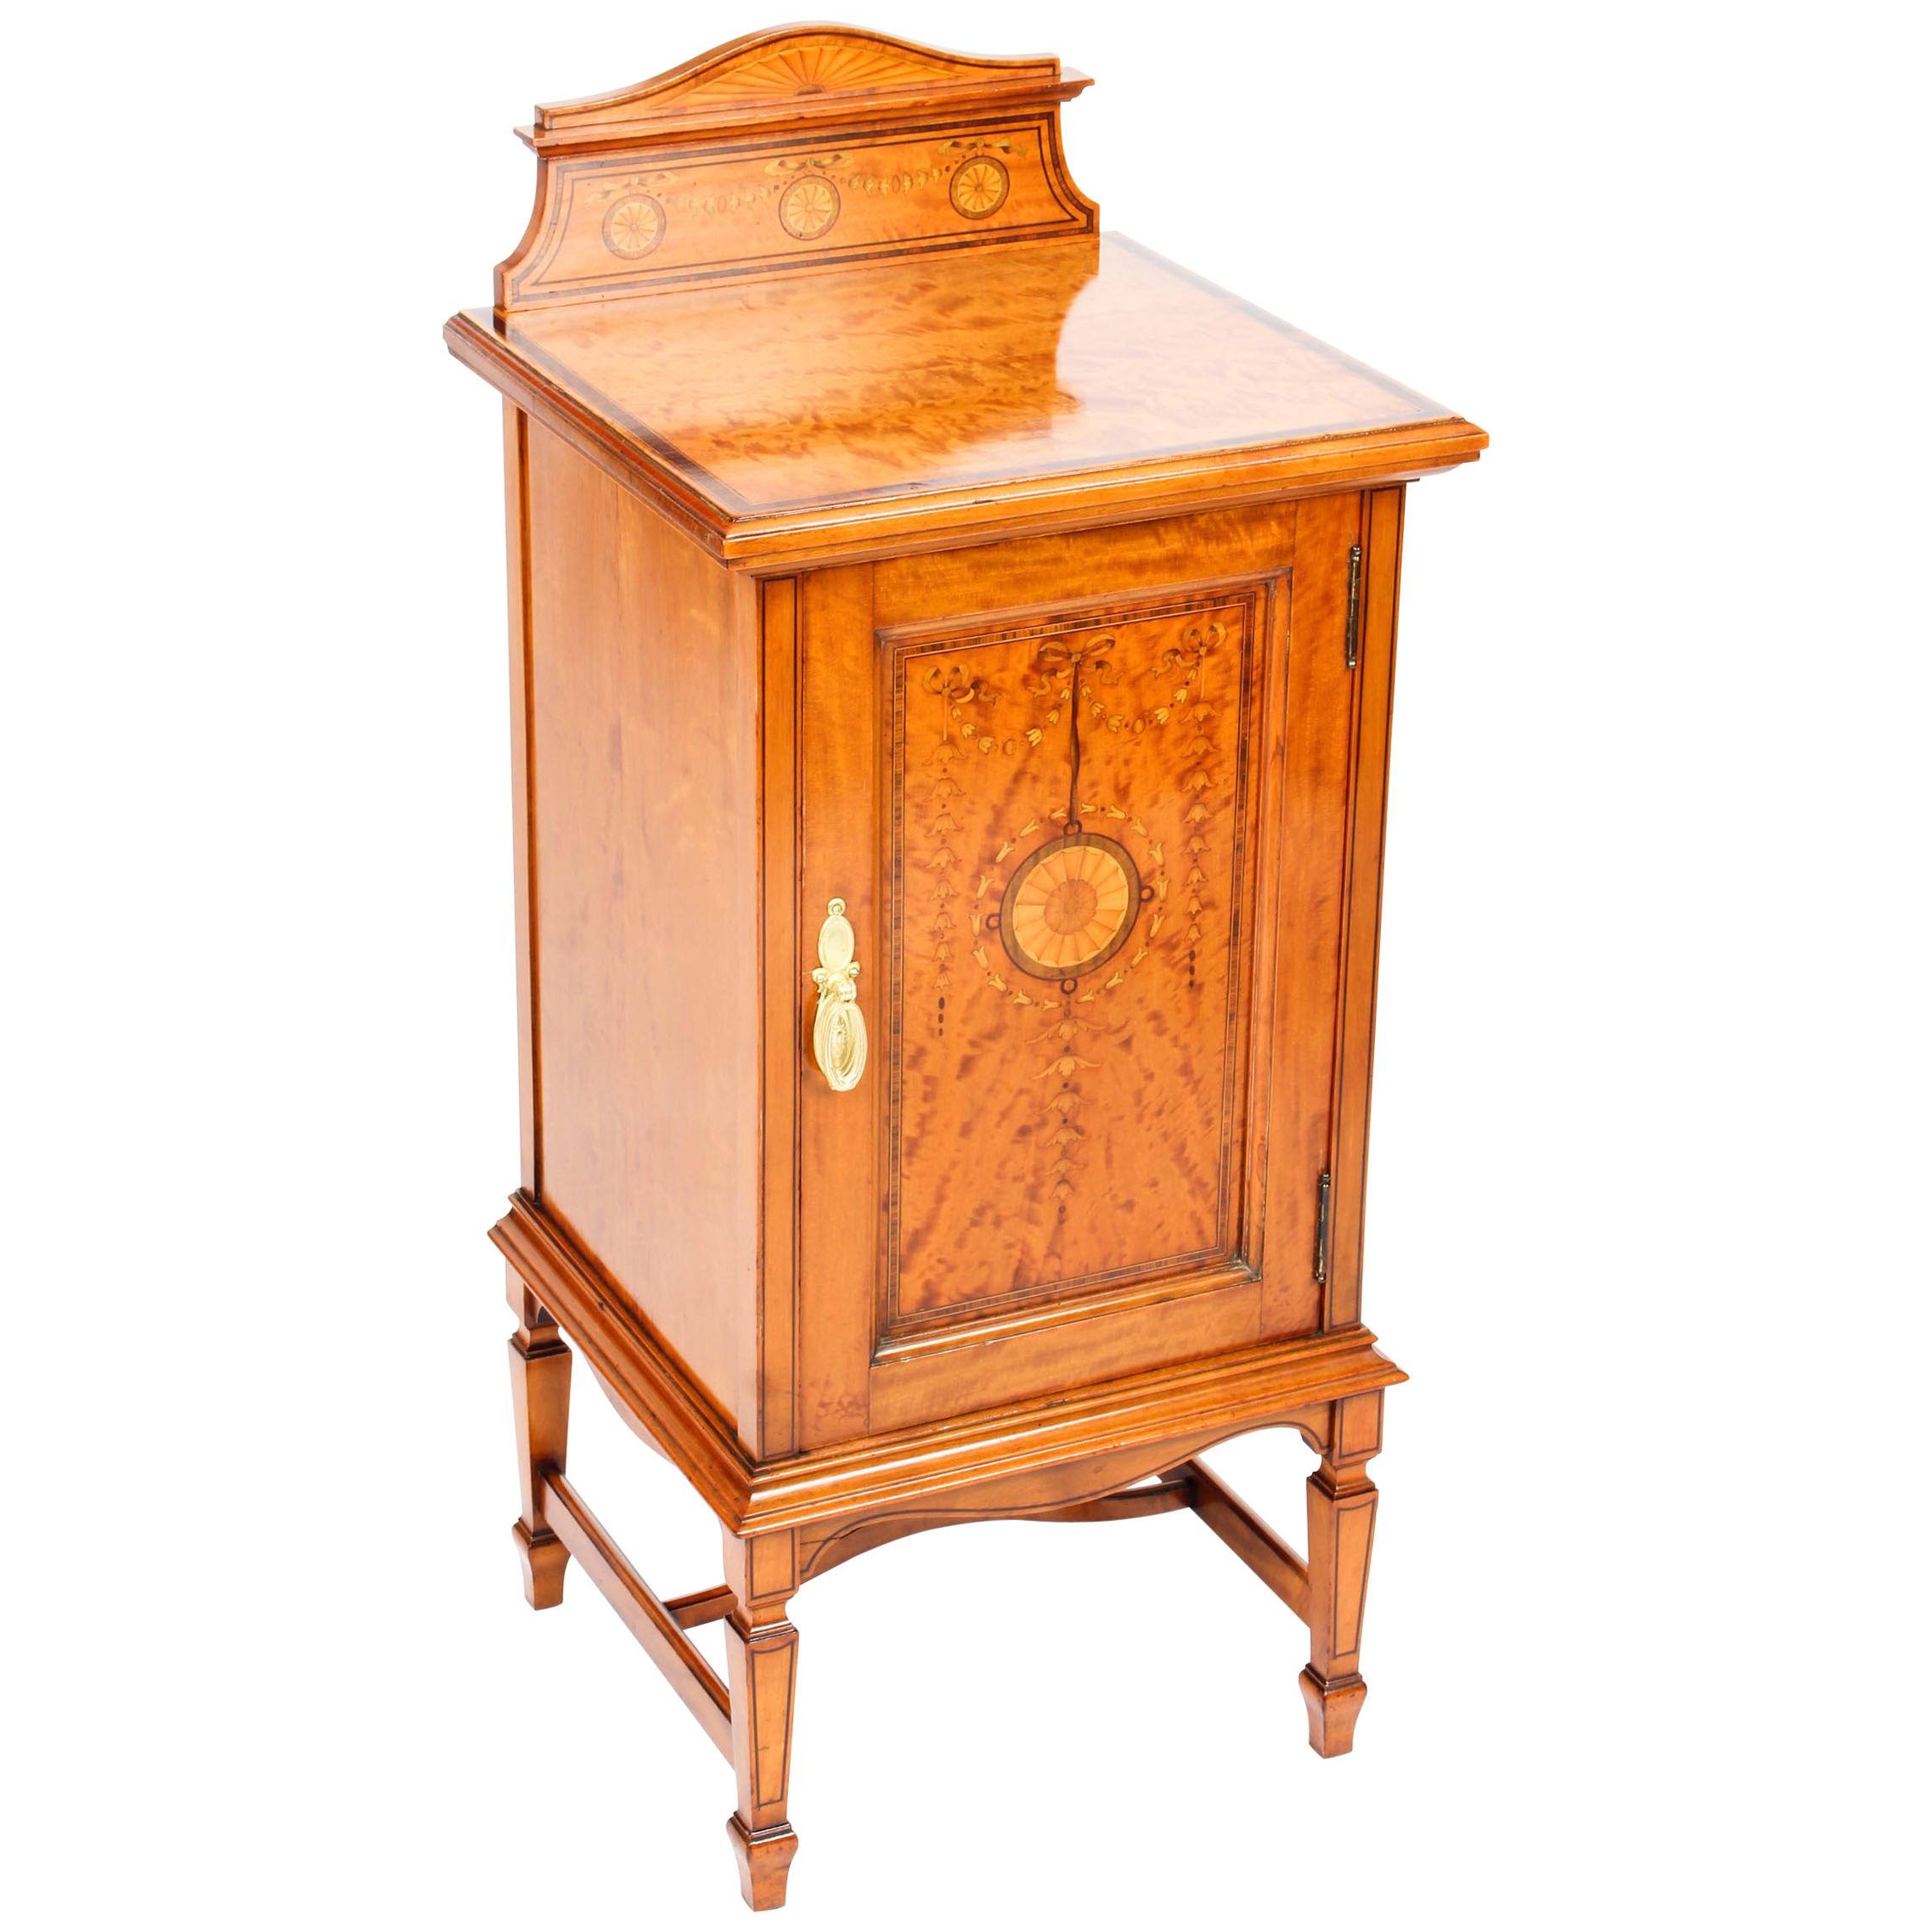 Antique Victorian Satinwood & Inlaid Bedside Cabinet, 19th Century